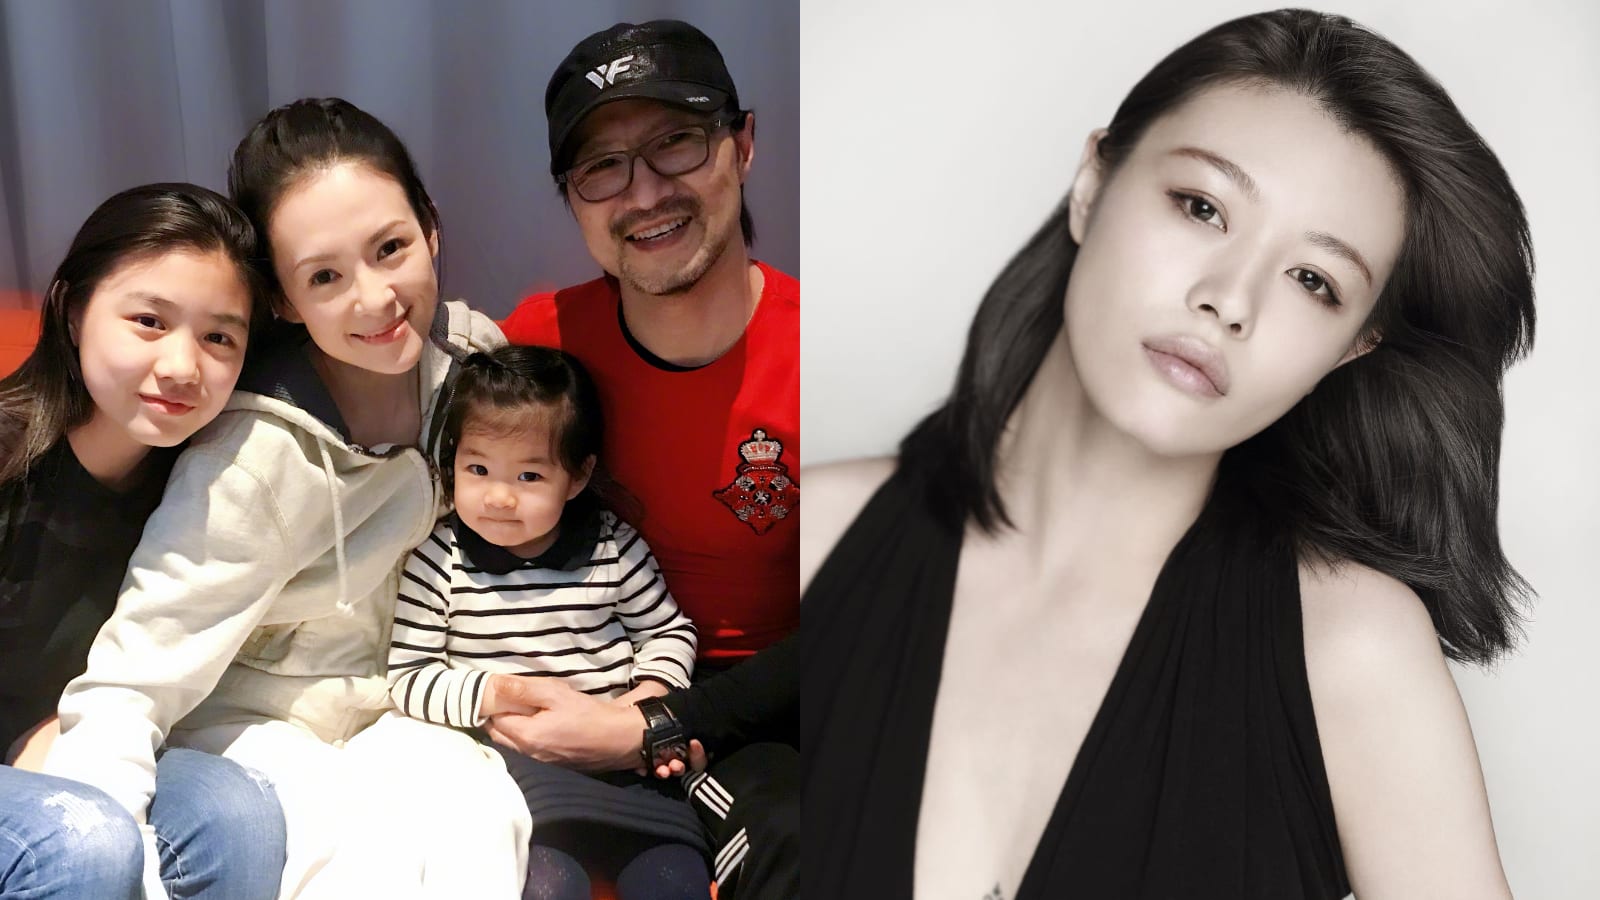 Wang Feng's Ex-Girlfriend Accuses Him Of Using Their 15-Year-Old Daughter To Boost His "Social Media Traffic"